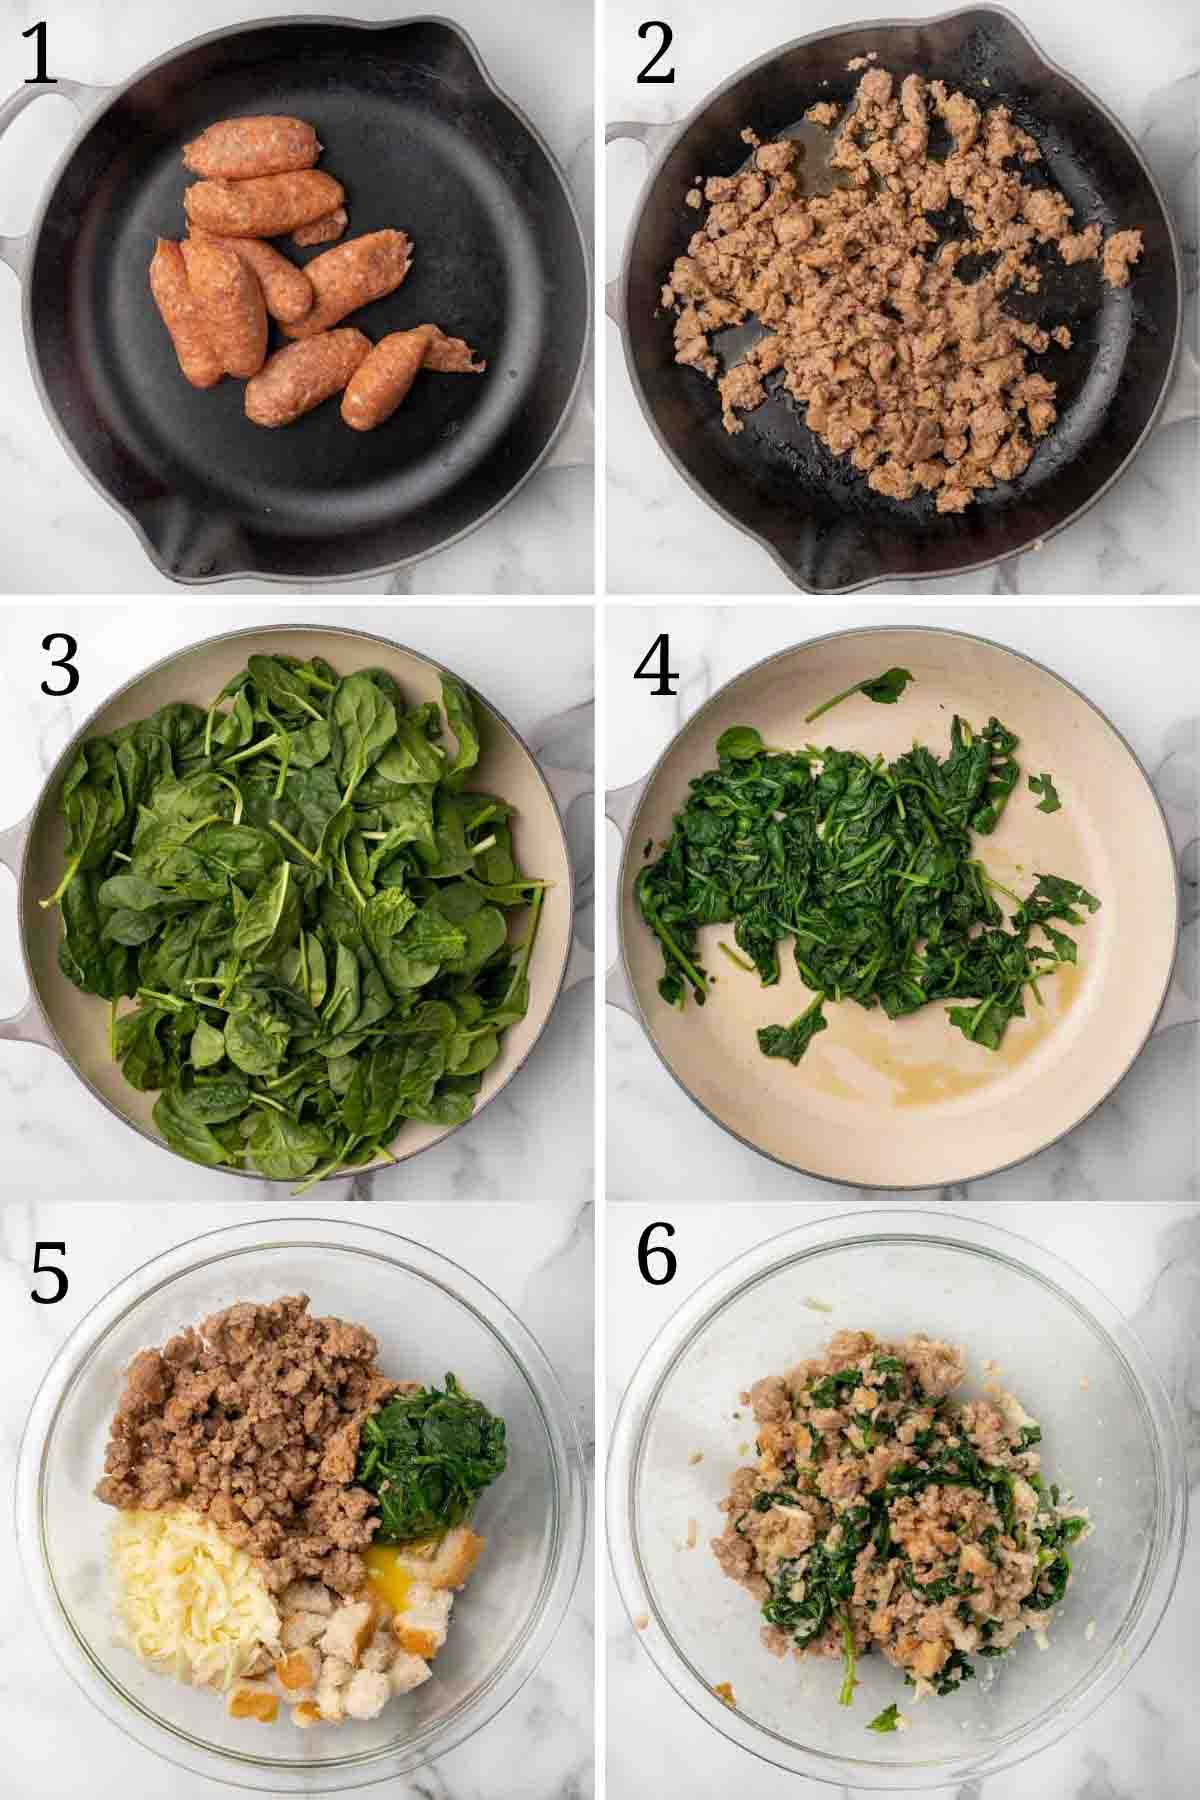 6 images showing the steps in making a stuffed pork tenderloin